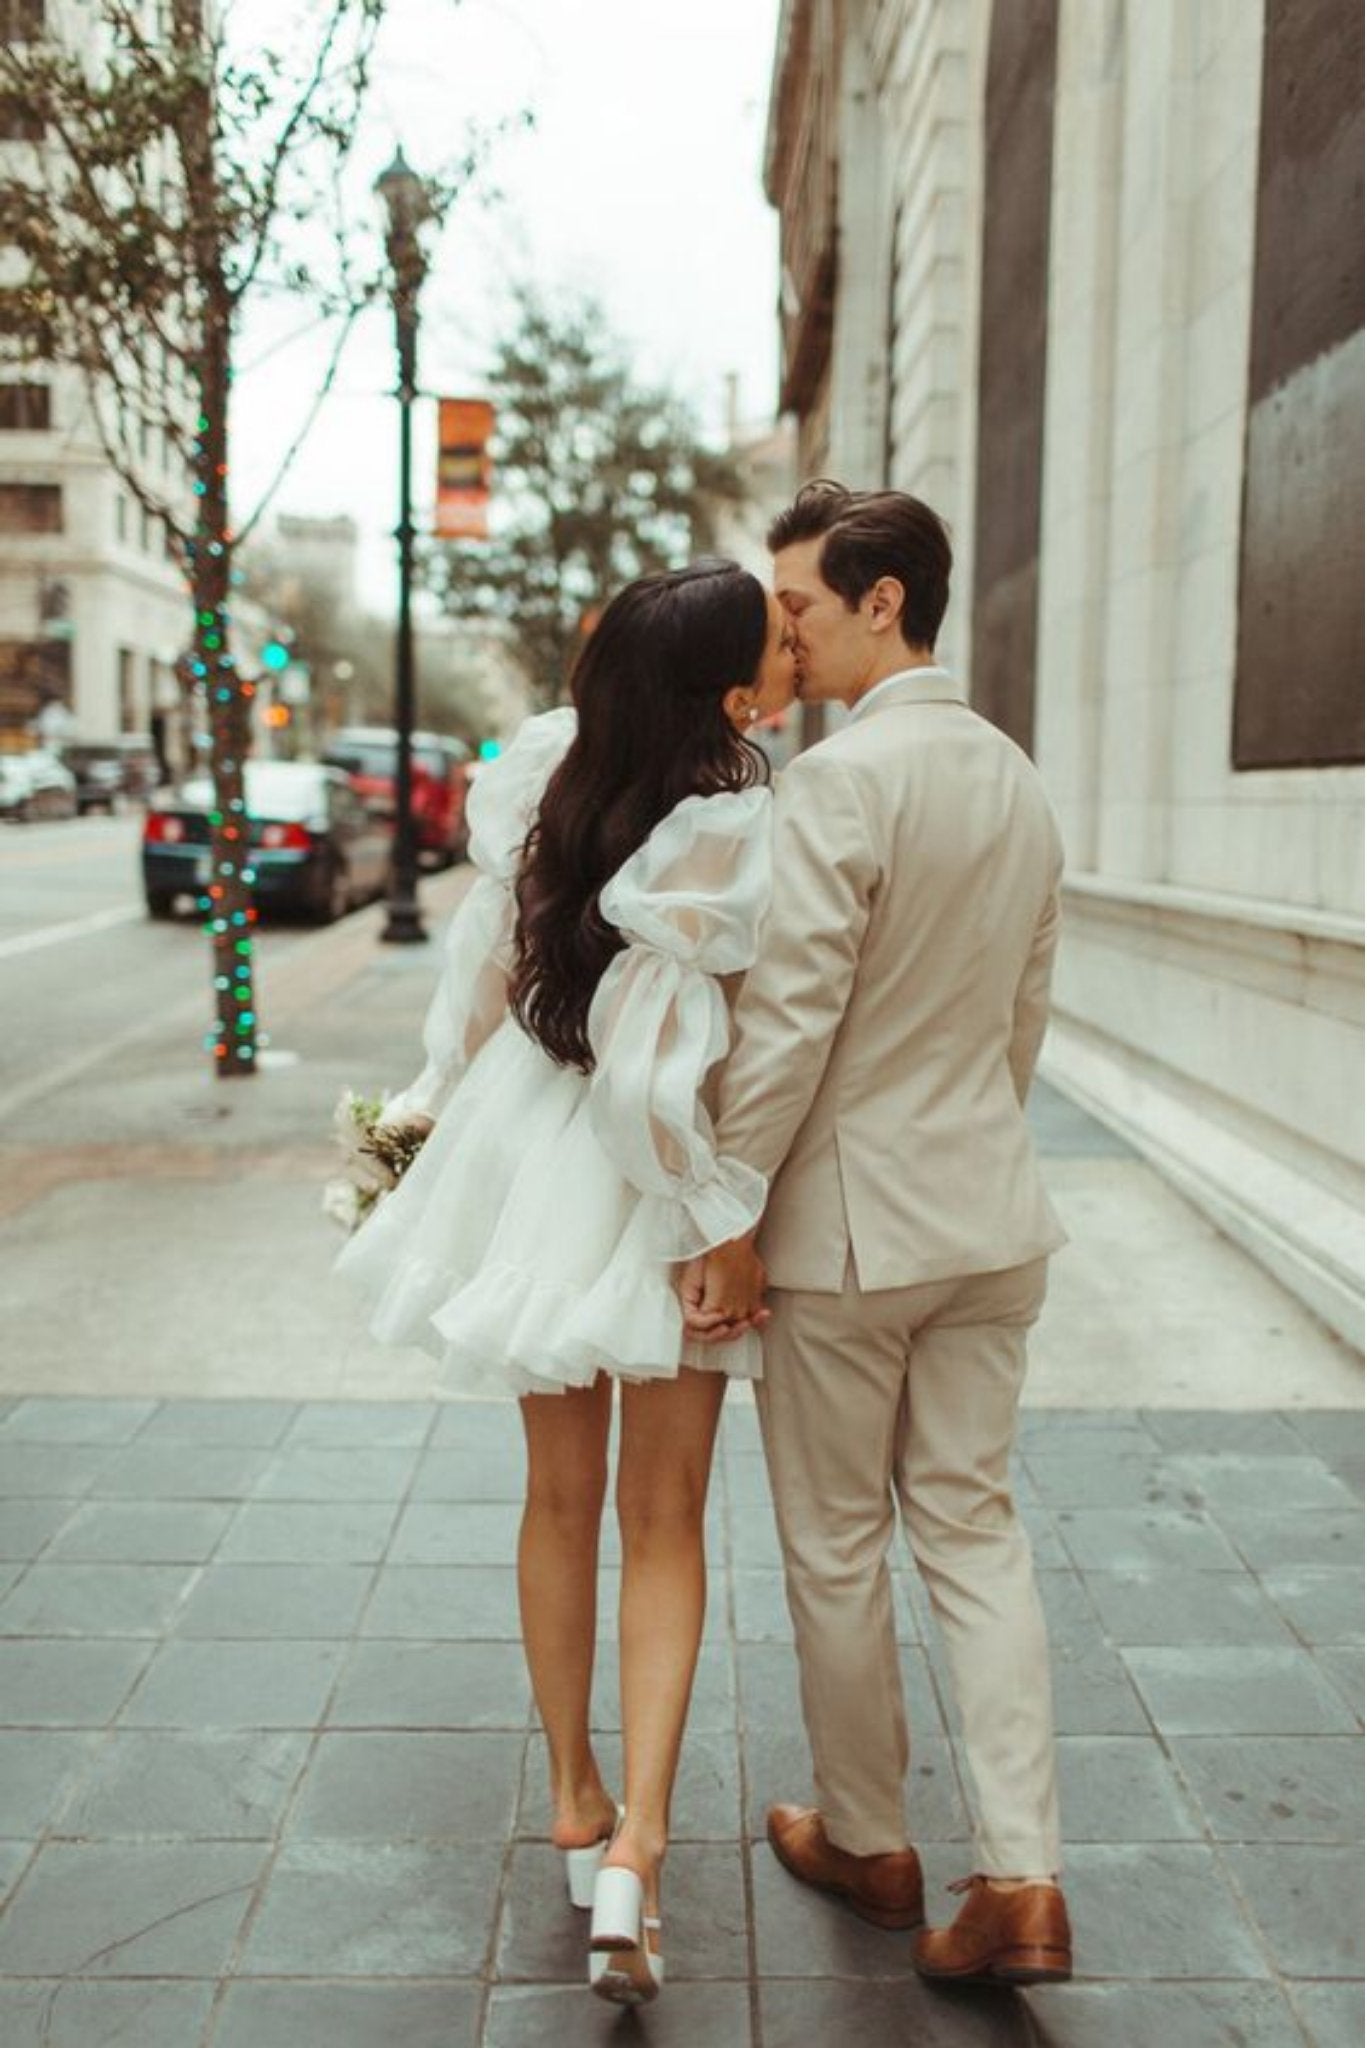 Engagement Shoot Inspiration - Pretty Collected